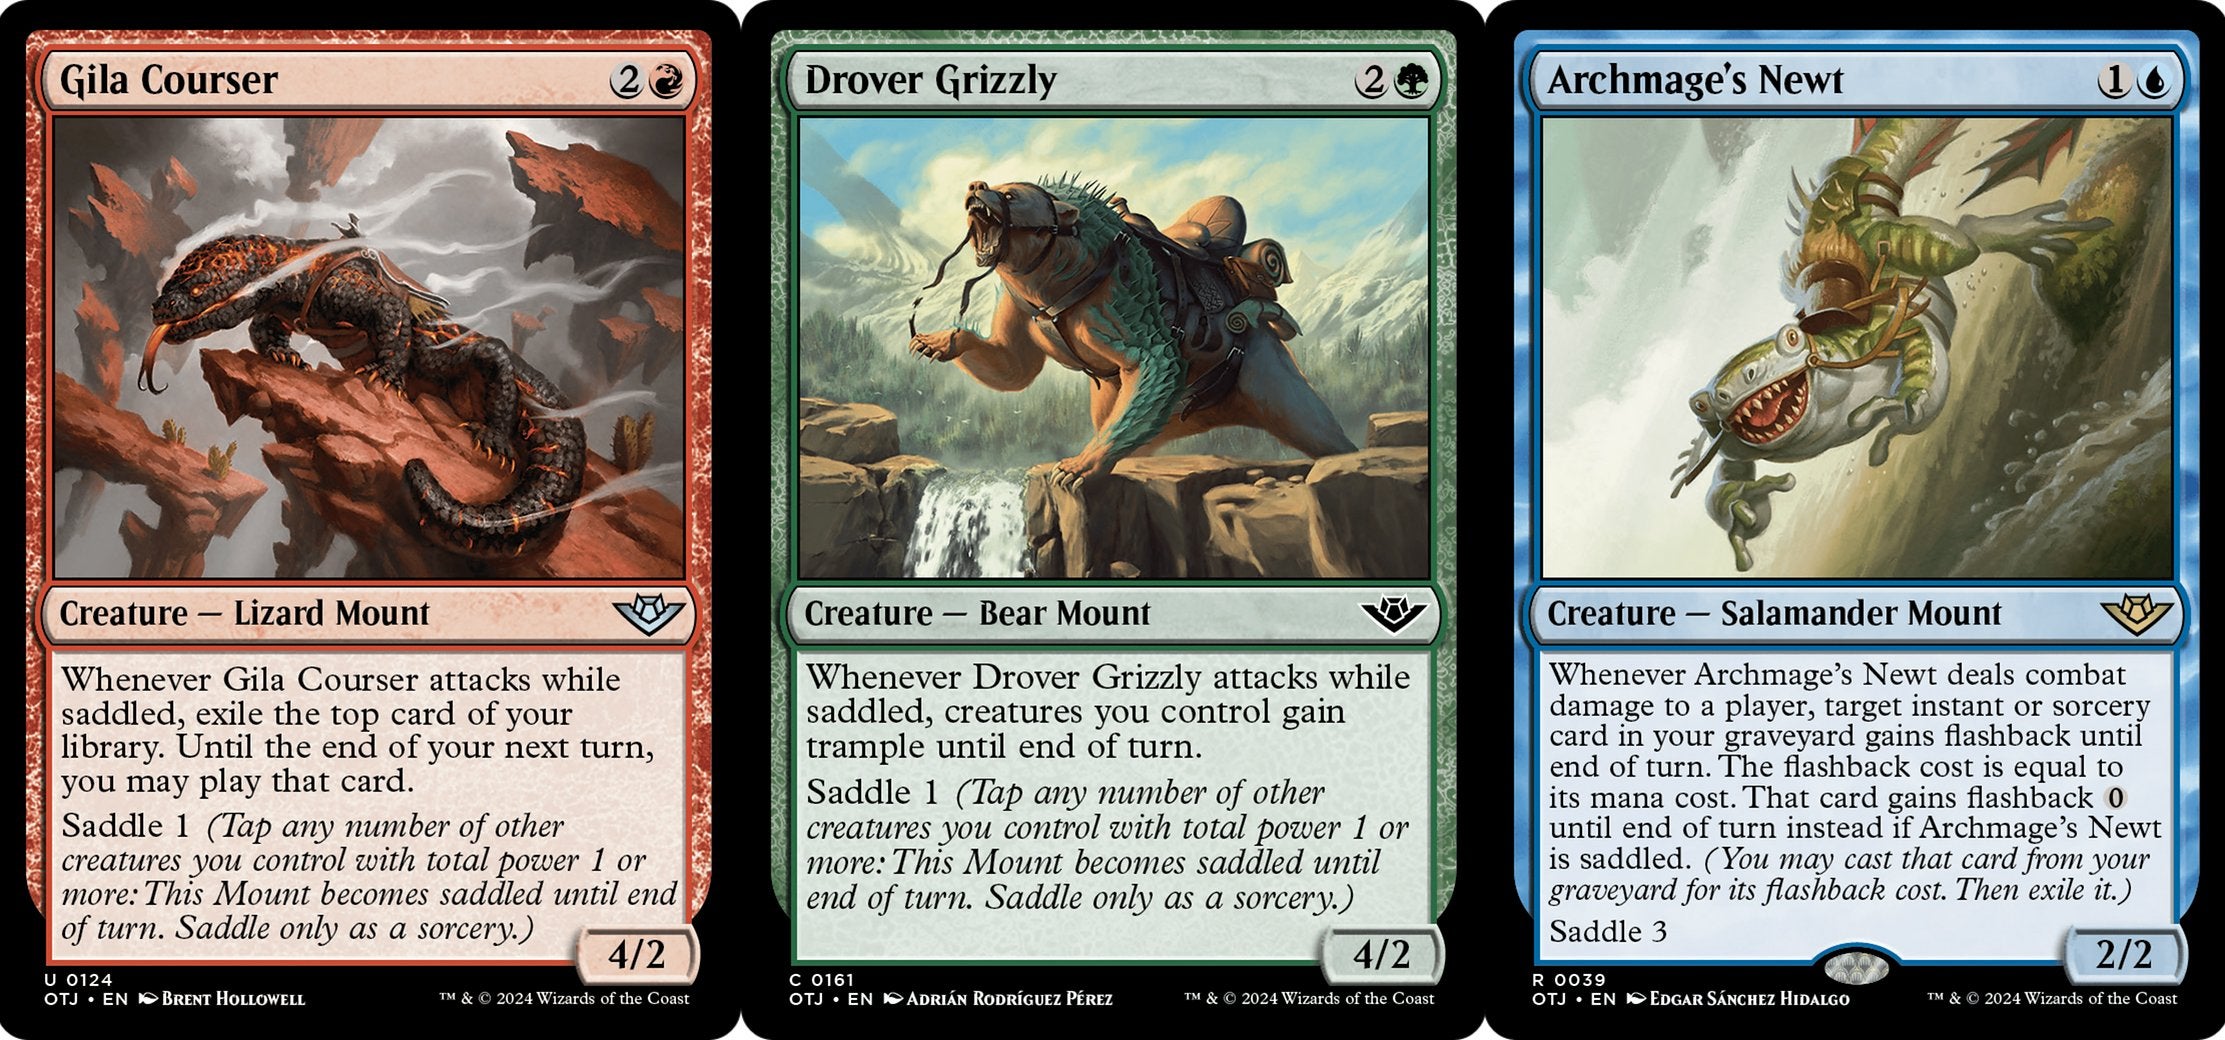 The Gila Courser, Drover Grizzly, and Archmage's Newt cards in MTG.